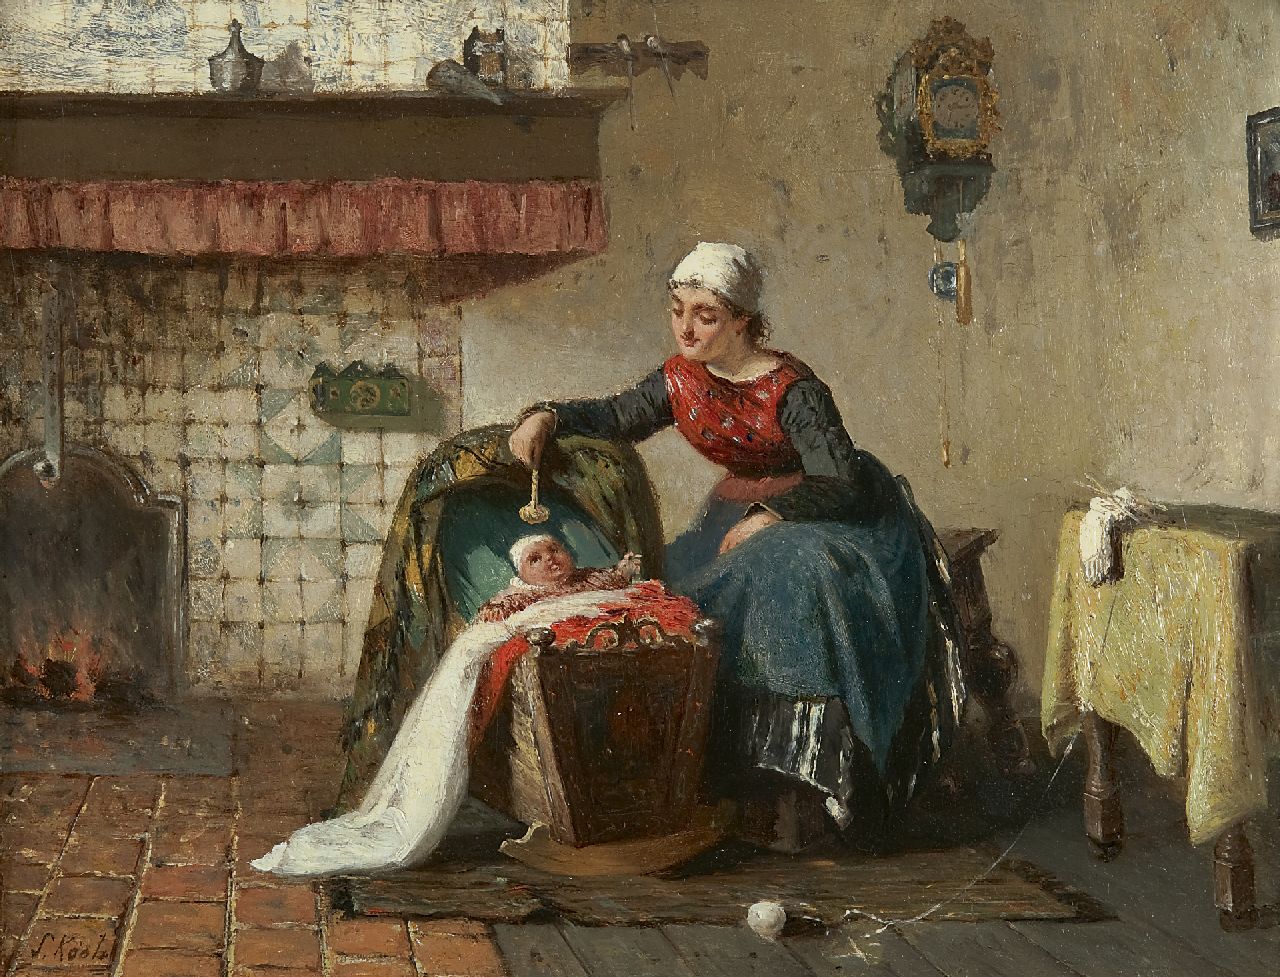 Kool S.C.  | Sipke 'Cornelis' Kool | Paintings offered for sale | Mother and child near a fireplace, oil on panel 26.6 x 35.0 cm, signed l.l. and dated 1881, without frame